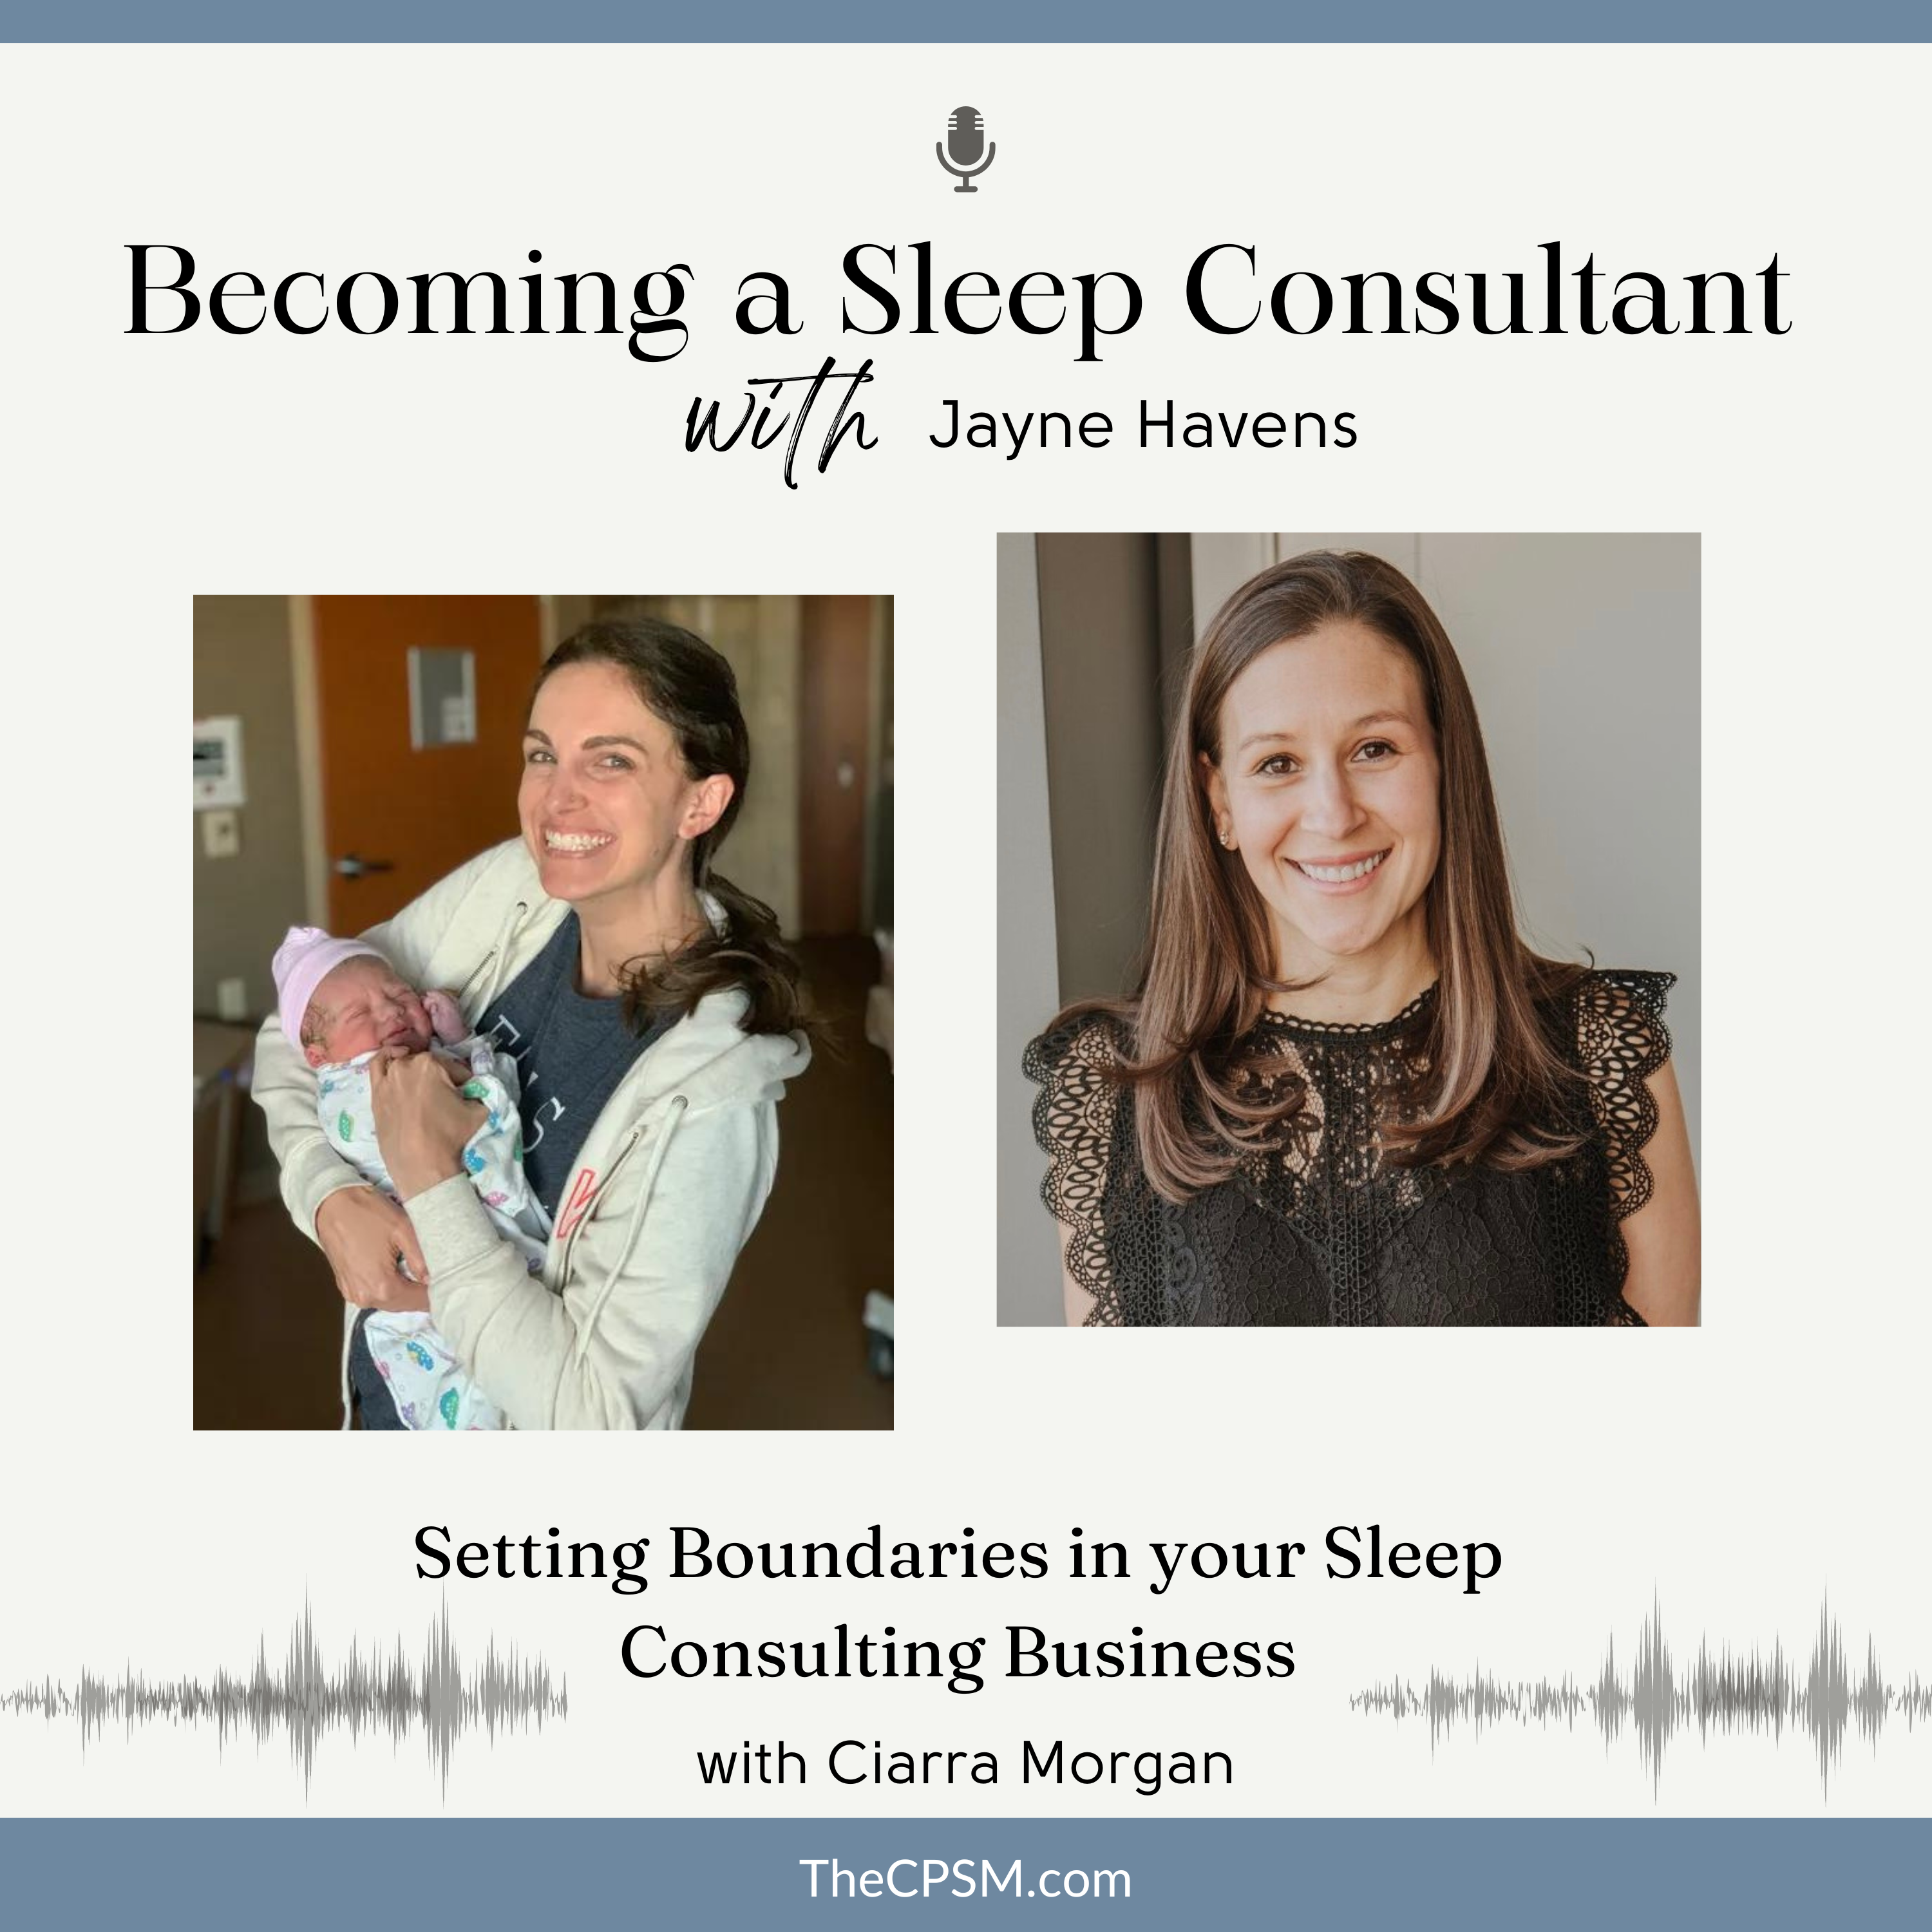 Setting Boundaries in your Sleep Consulting Business with Ciarra Morgan